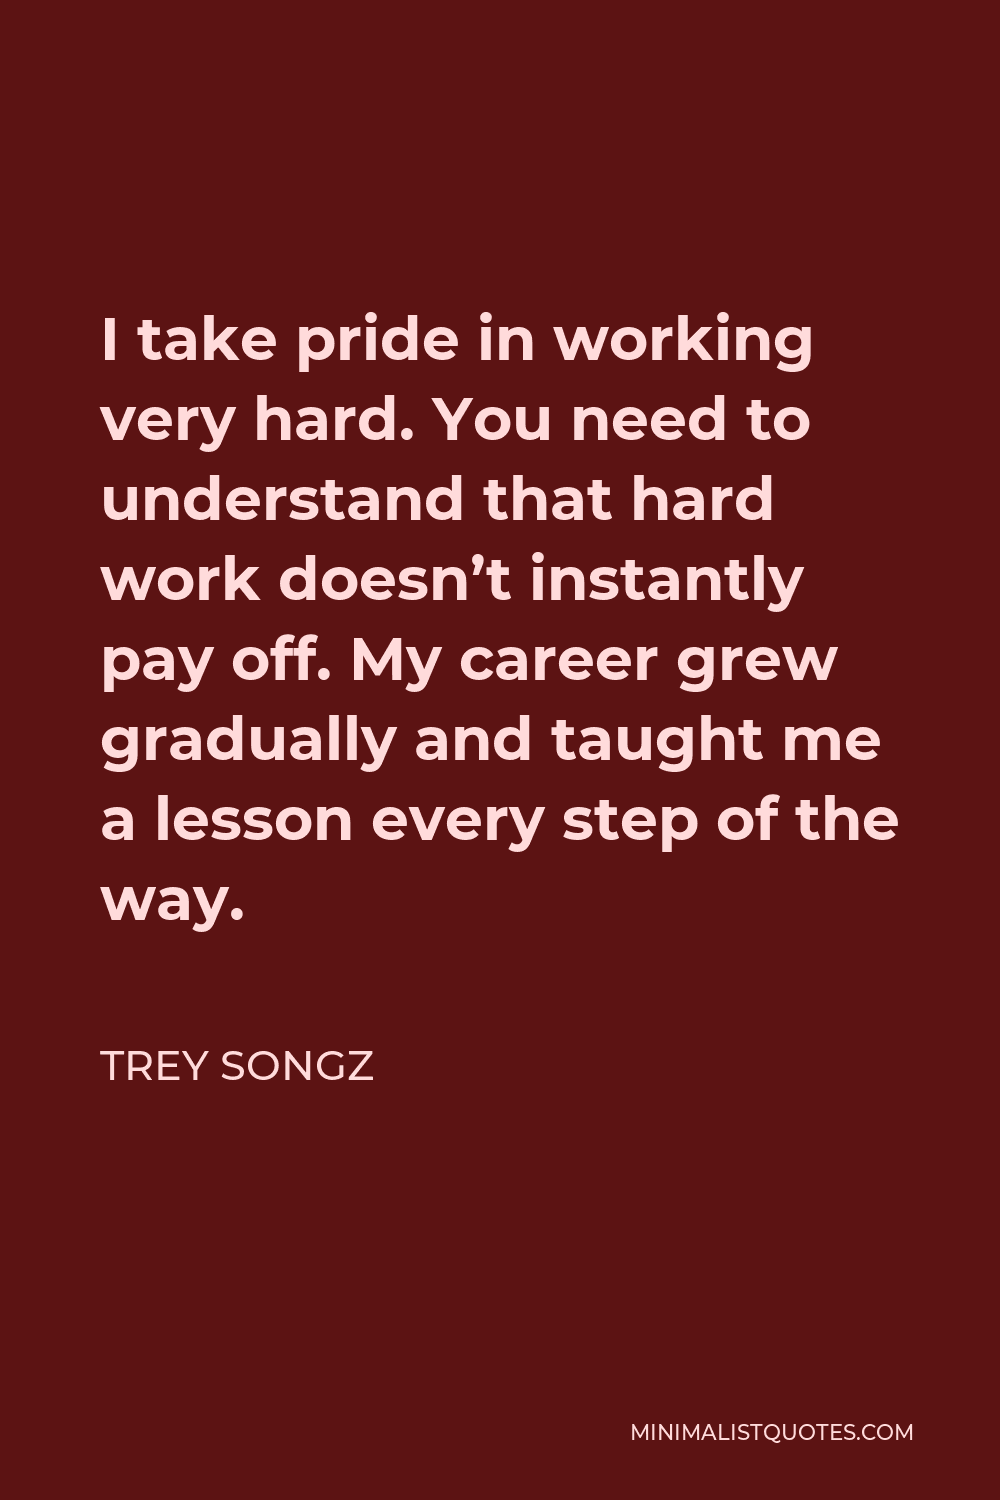 Trey Songz Quote - I take pride in working very hard. You need to understand that hard work doesn’t instantly pay off. My career grew gradually and taught me a lesson every step of the way.